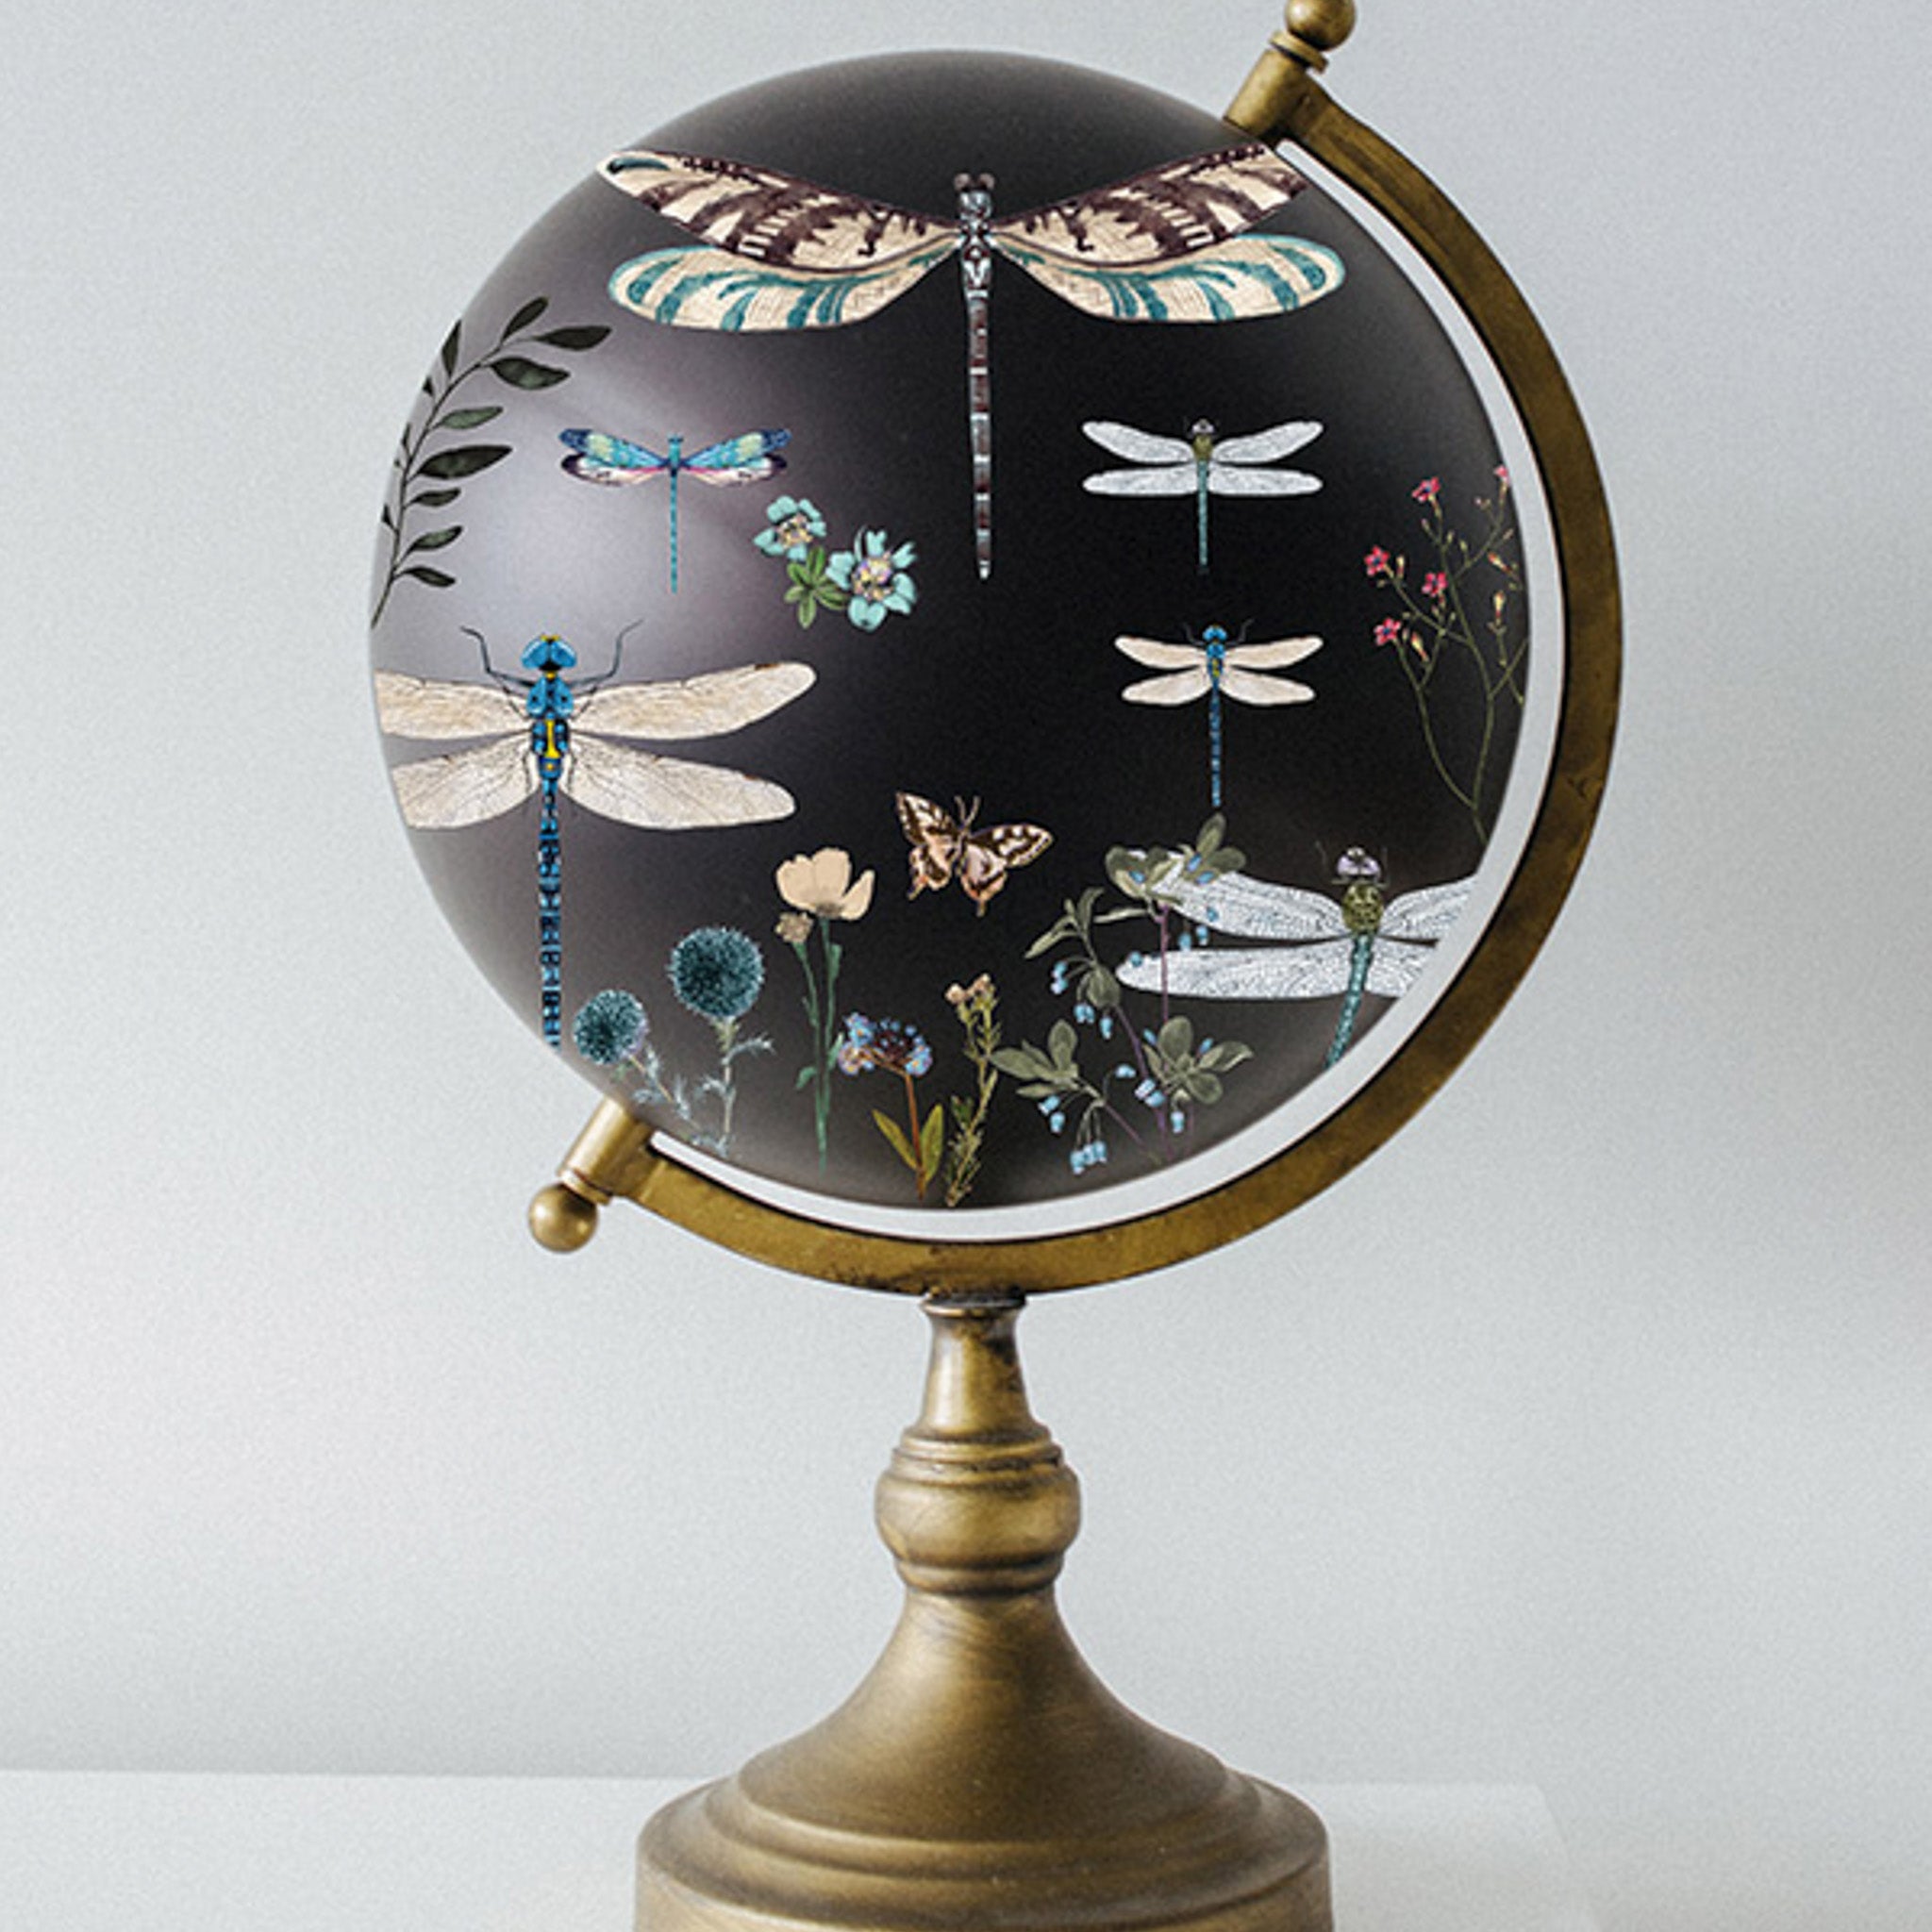 A world globe is painted black and features ReDesign with Prima's Spring Dragonfly small transfer on it.